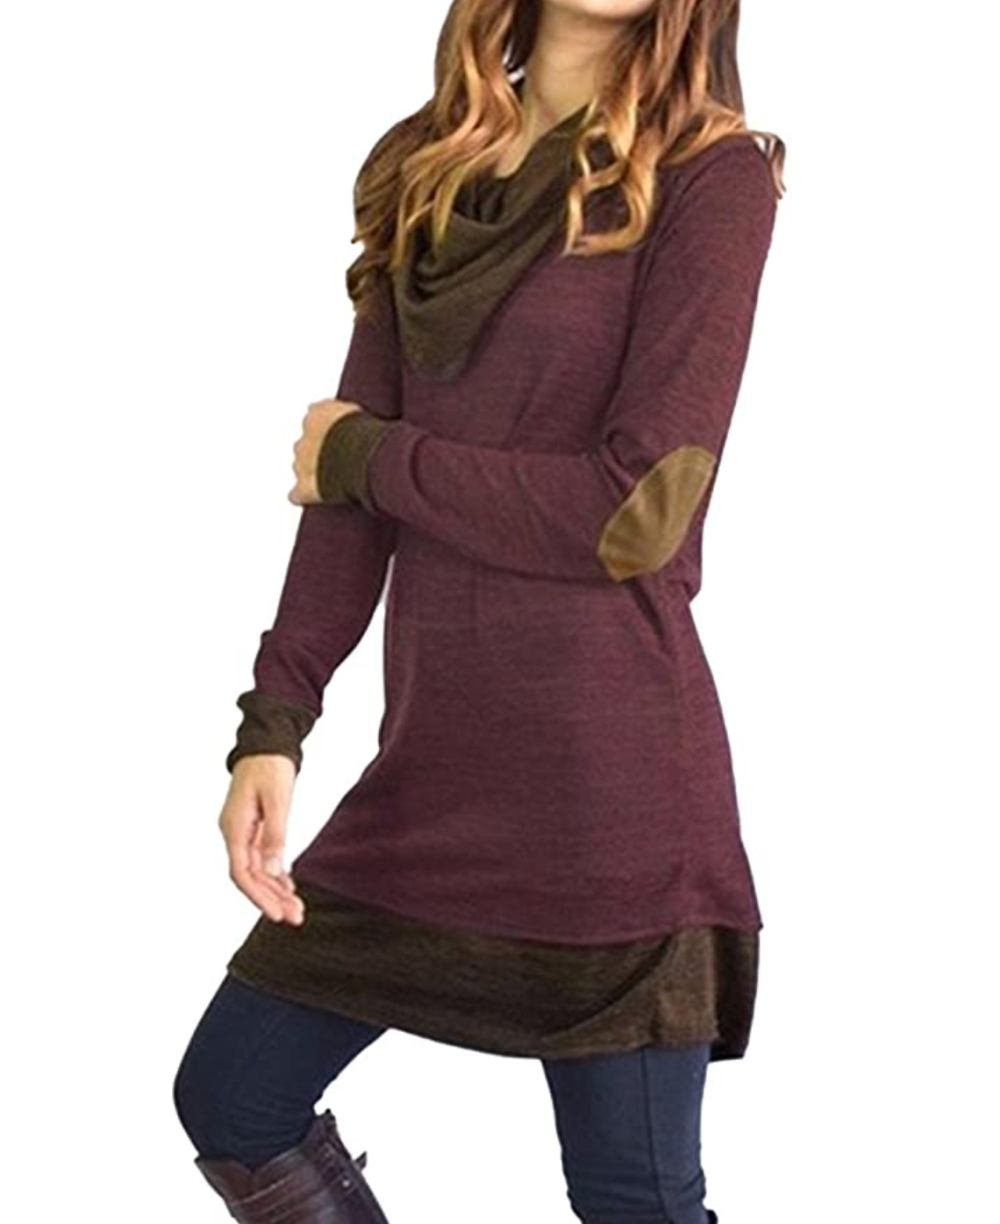 https://www.usmagazine.com/wp-content/uploads/2020/12/Famulily-Womens-Cowl-Neck-Two-Tone-Color-Block-Tunic-Blouse-2.png?w=1000&quality=86&strip=all